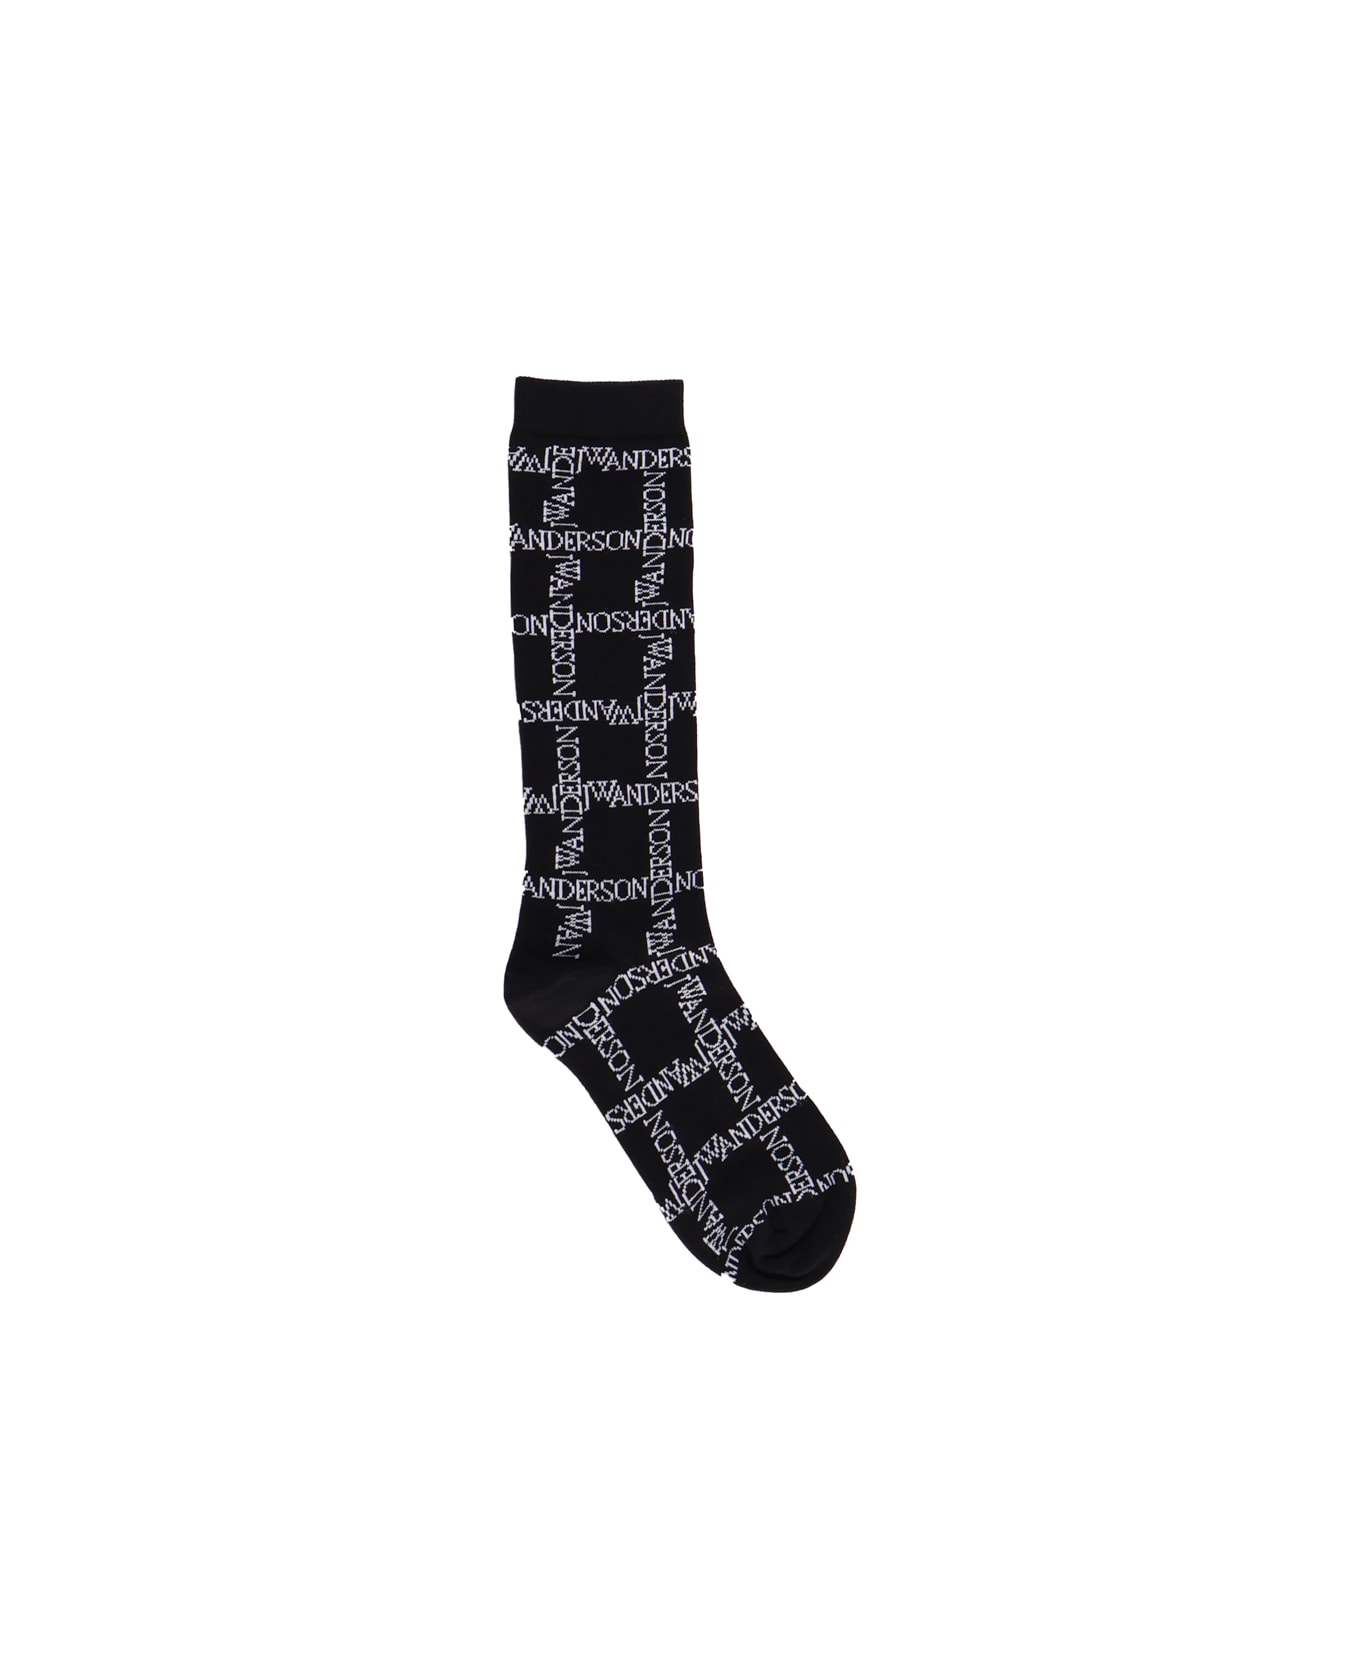 J.W. Anderson Men's Socks With All-over Logo Decoration - Black/white 靴下